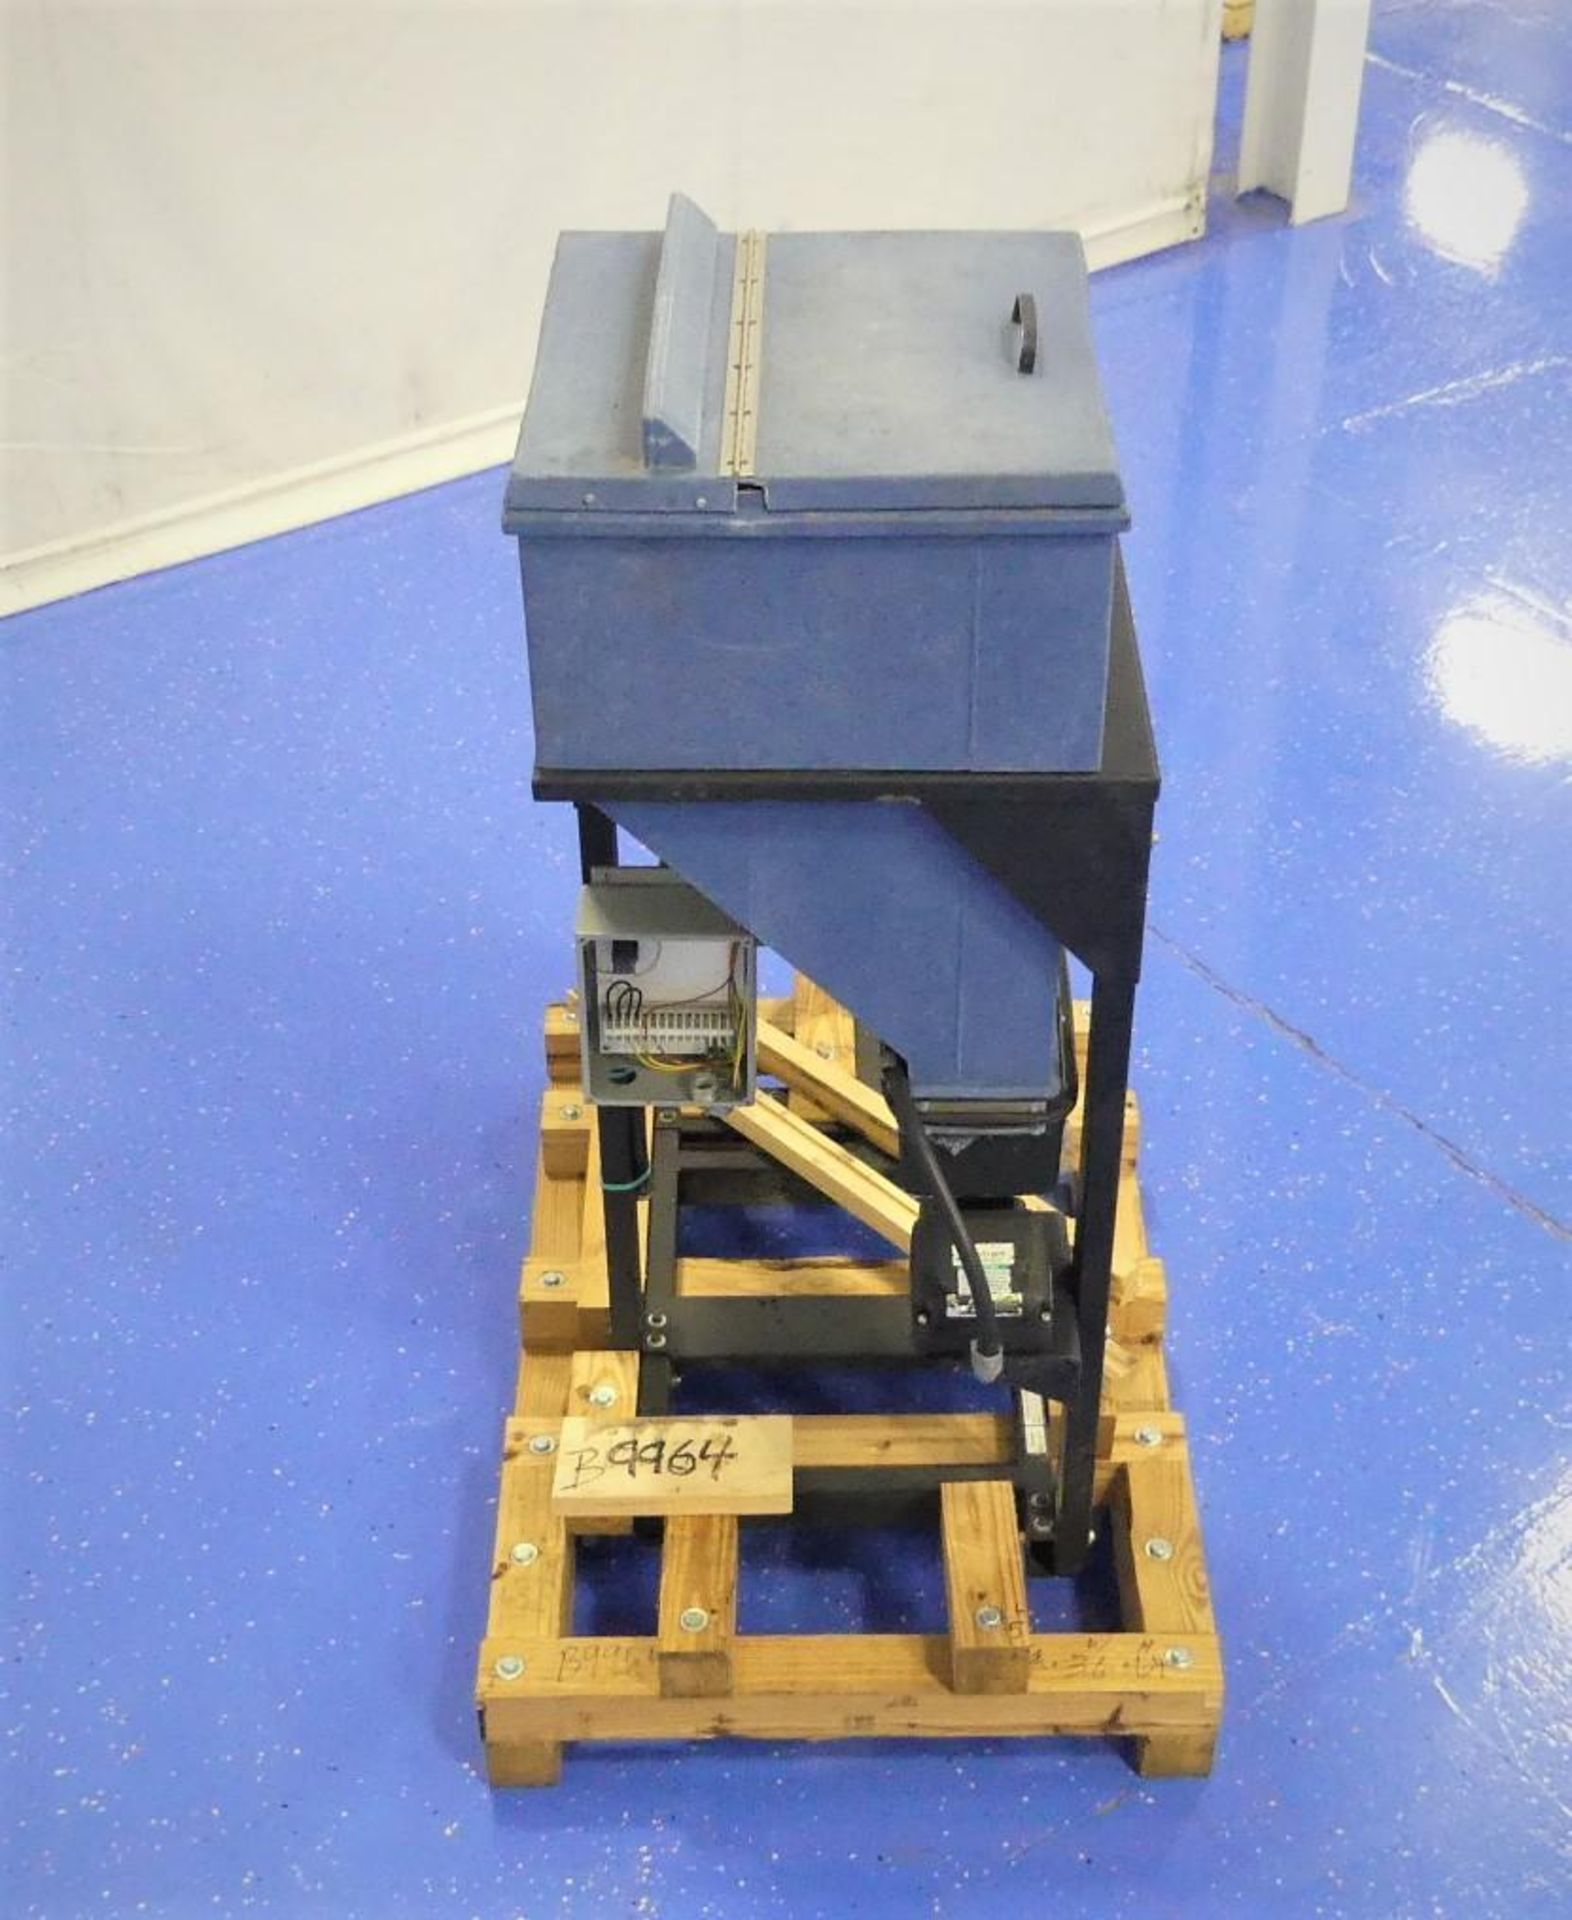 Nordson Hot Melt Hopper Feeder with Stand - Image 2 of 10